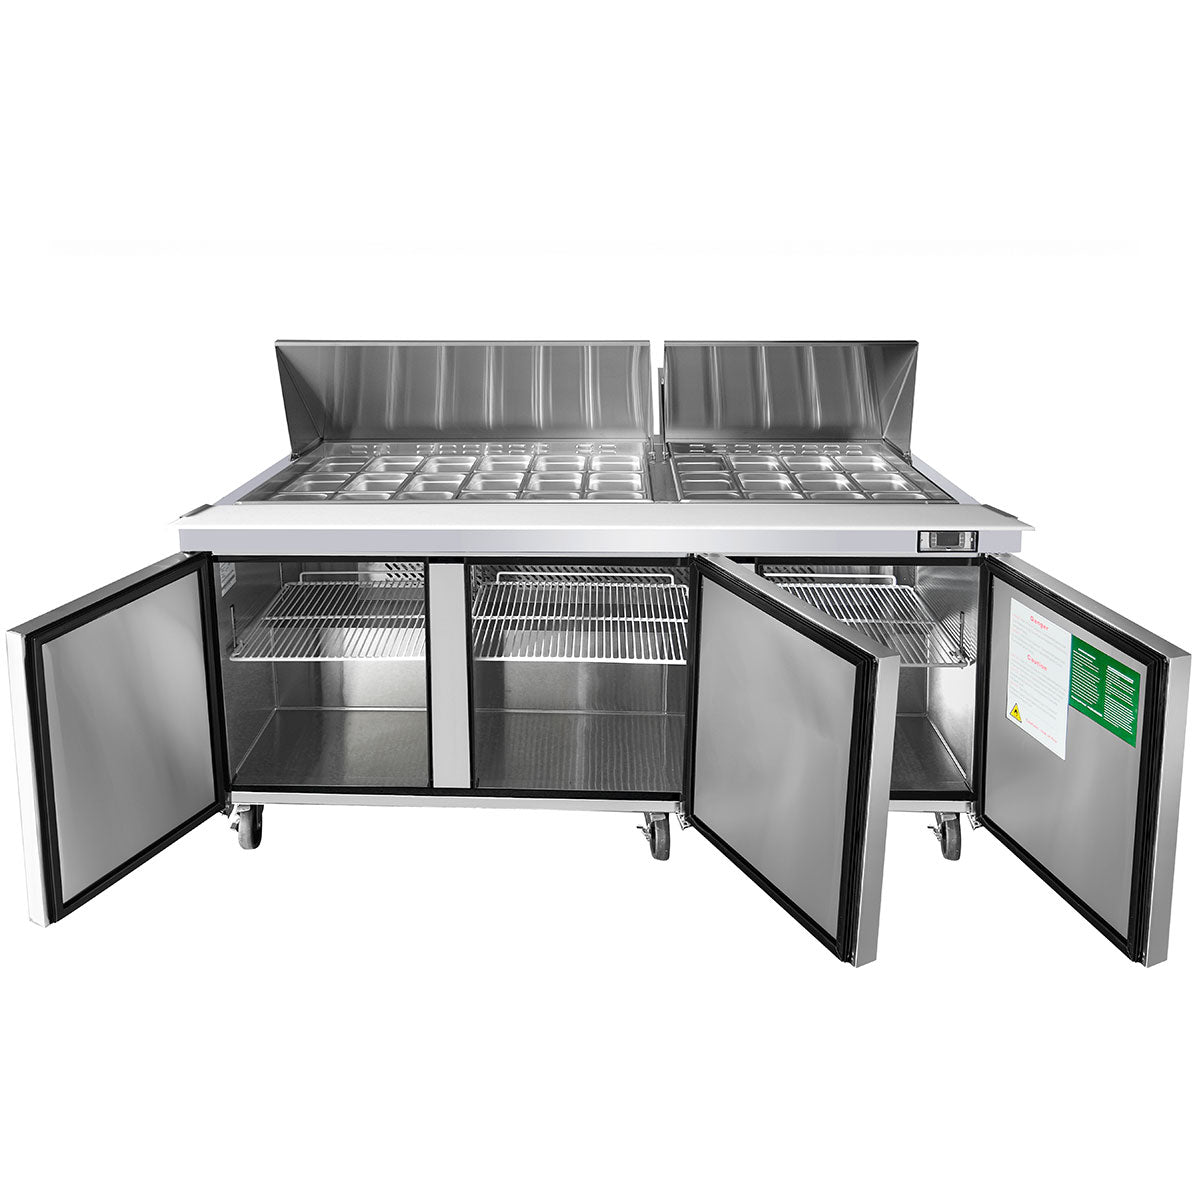 Atosa - MSF8308GR - 72″ Refrigerated Mega Top Sandwich Prep. Table